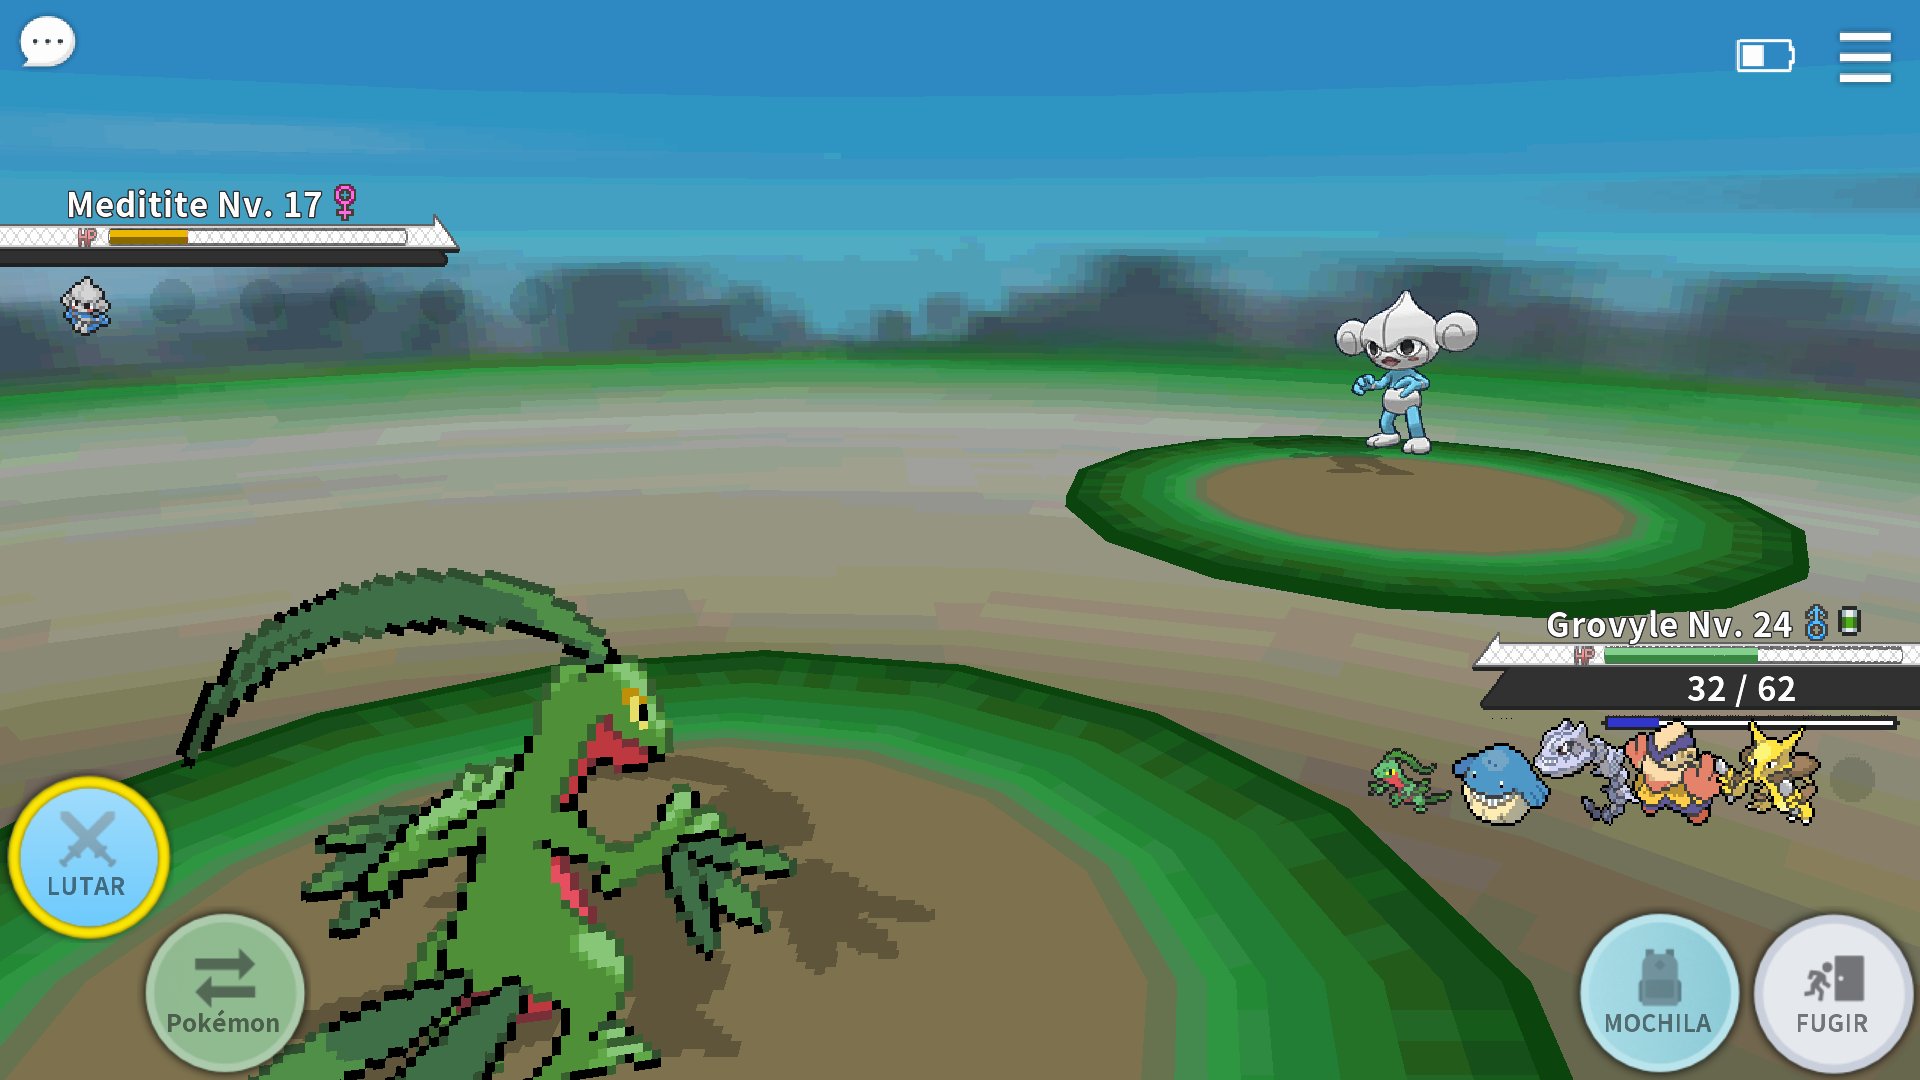 PokeMMO Mods to Enhance Your Gameplay [12 Best Mods]